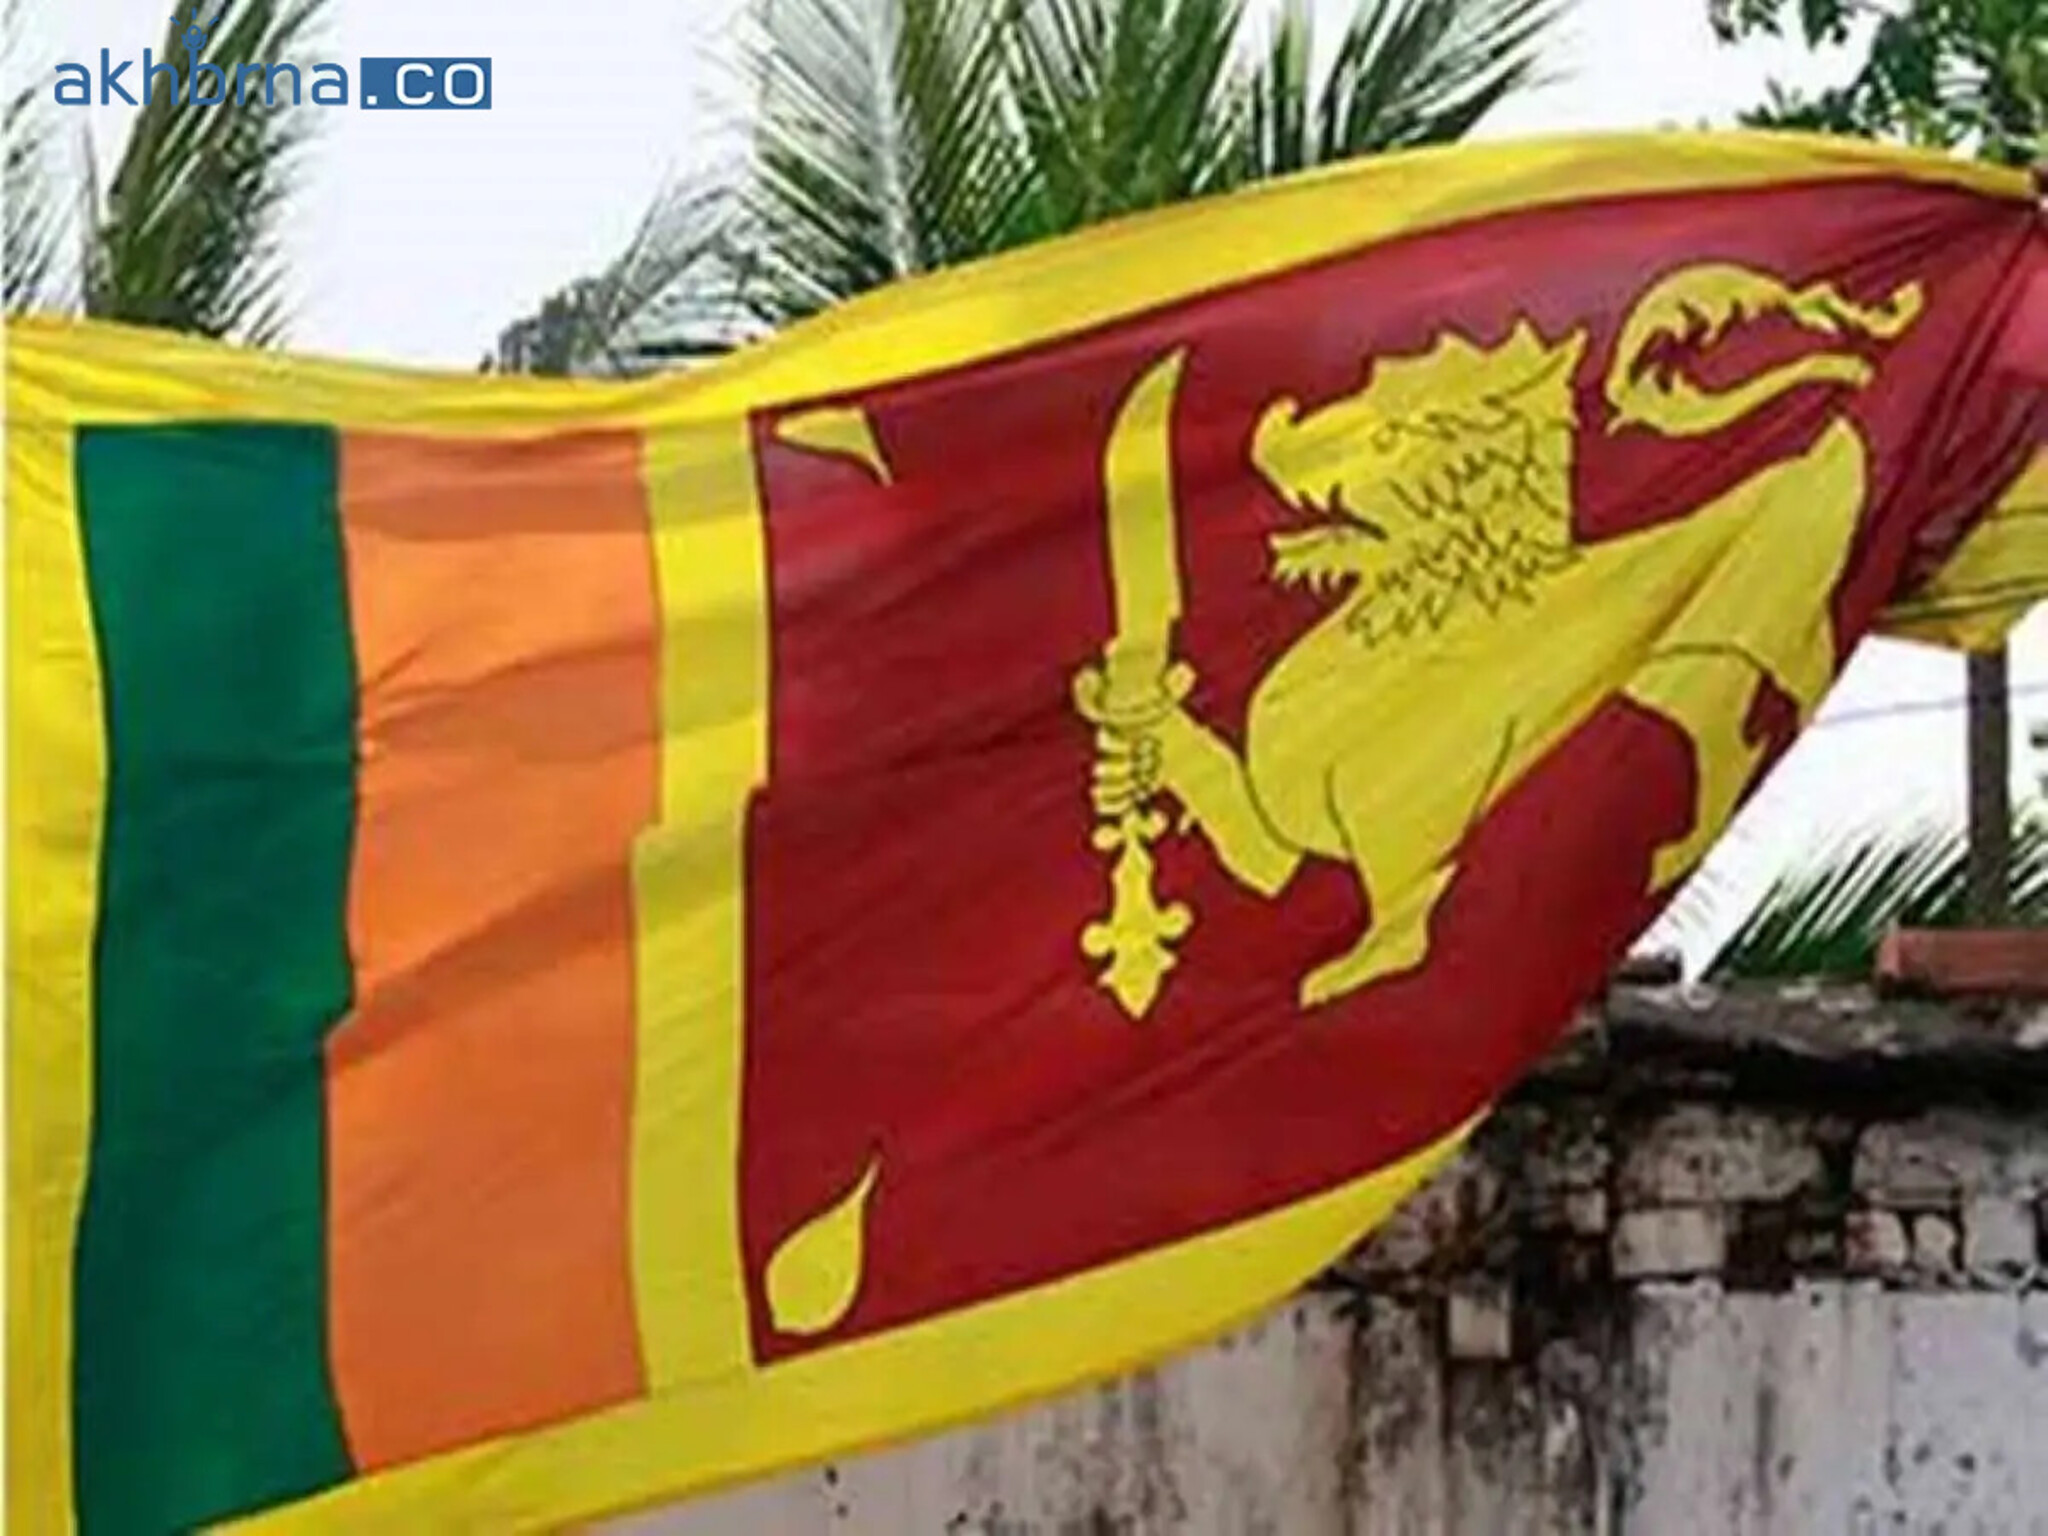 Sri Lanka cabinet announces the approval of downgrading to a "low-income country